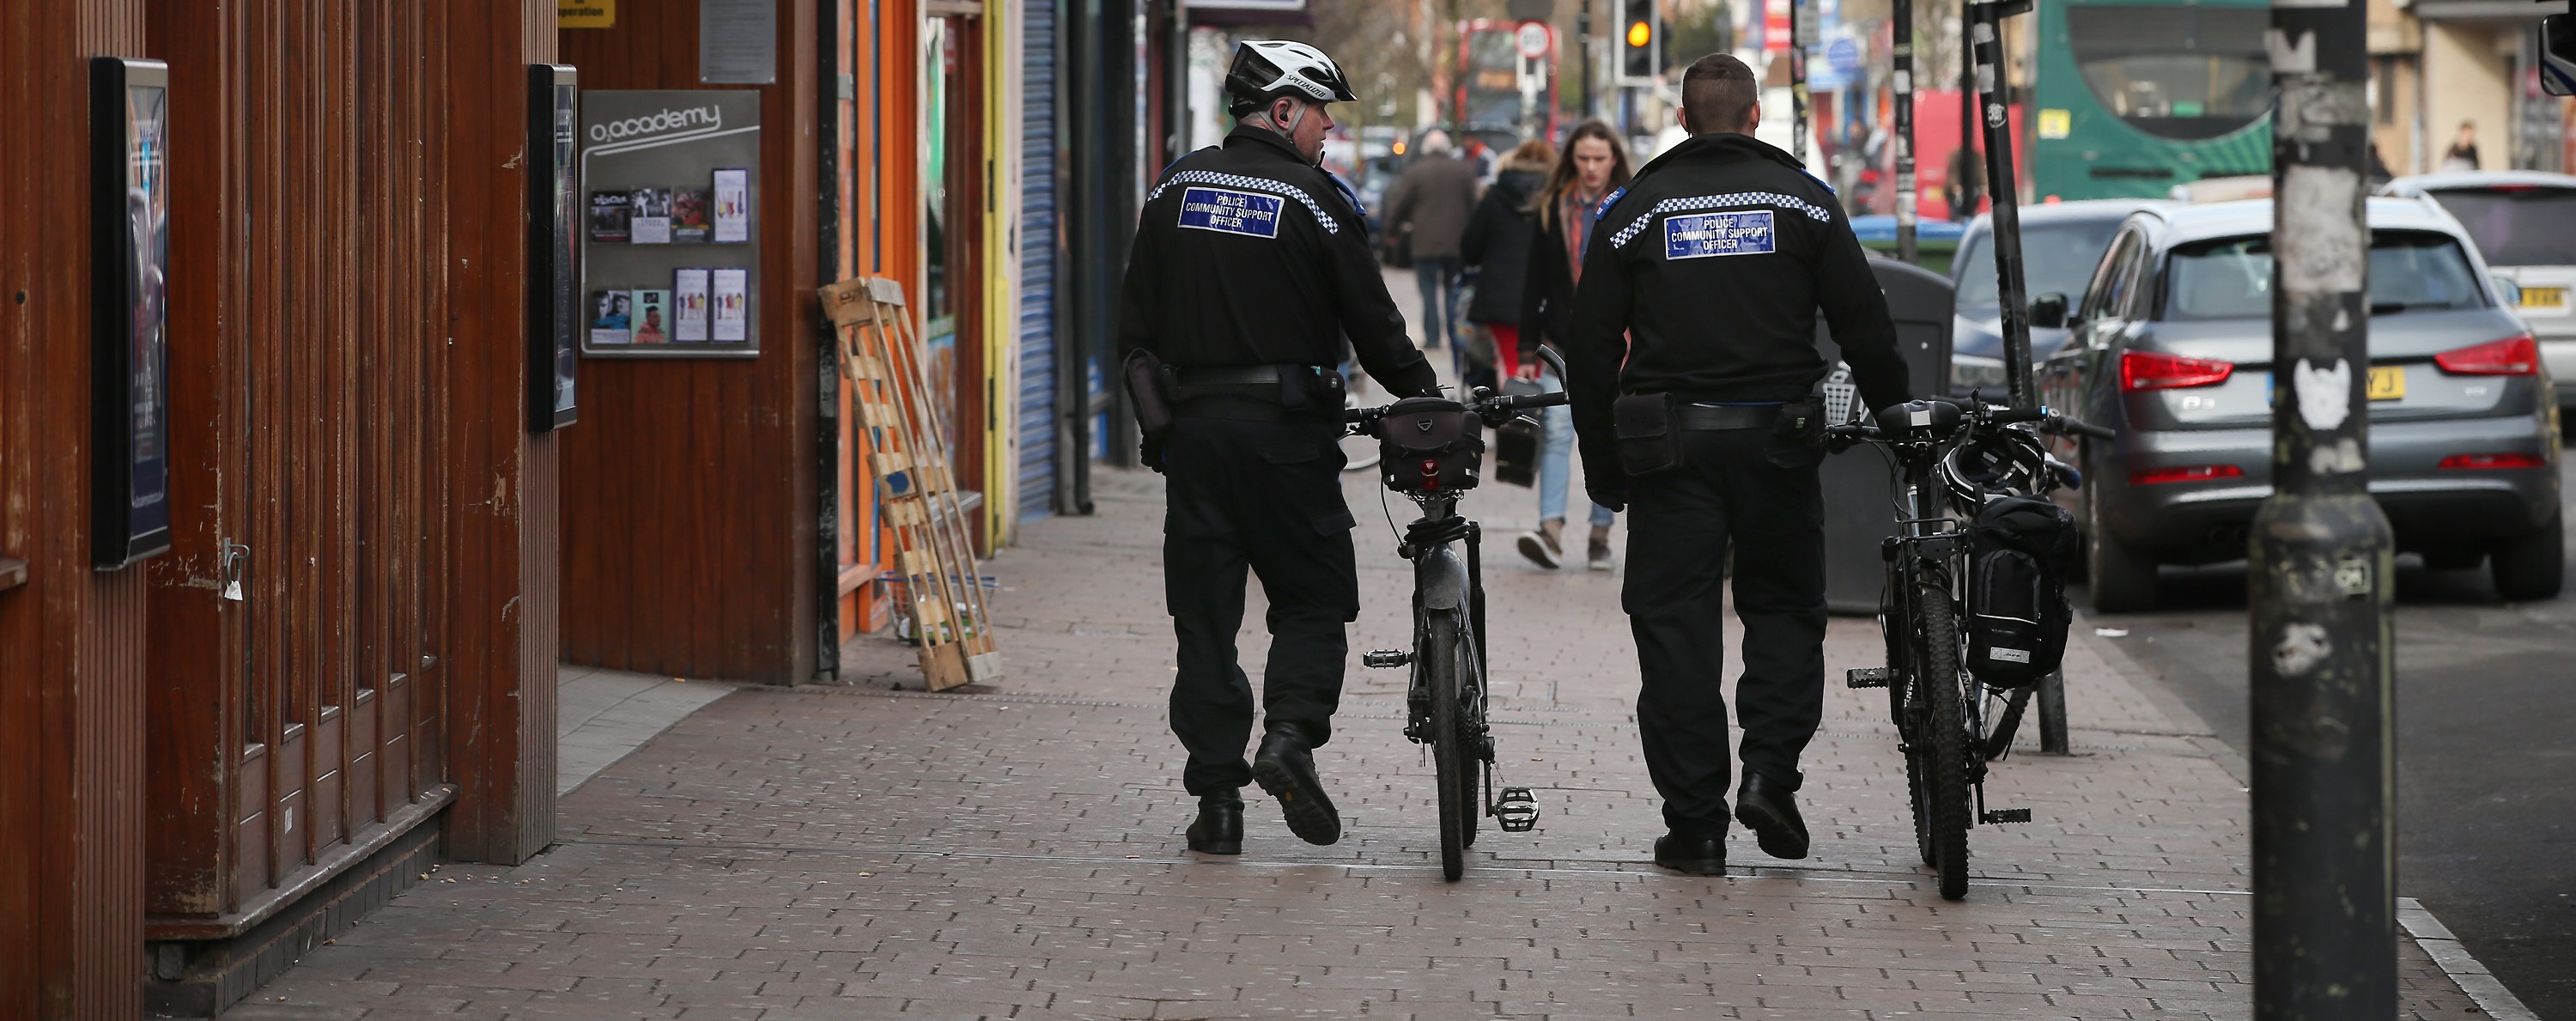 Police Community Support Officers in Oxford, March 2015 (Photo: Peter Macdiarmid/Getty Images)